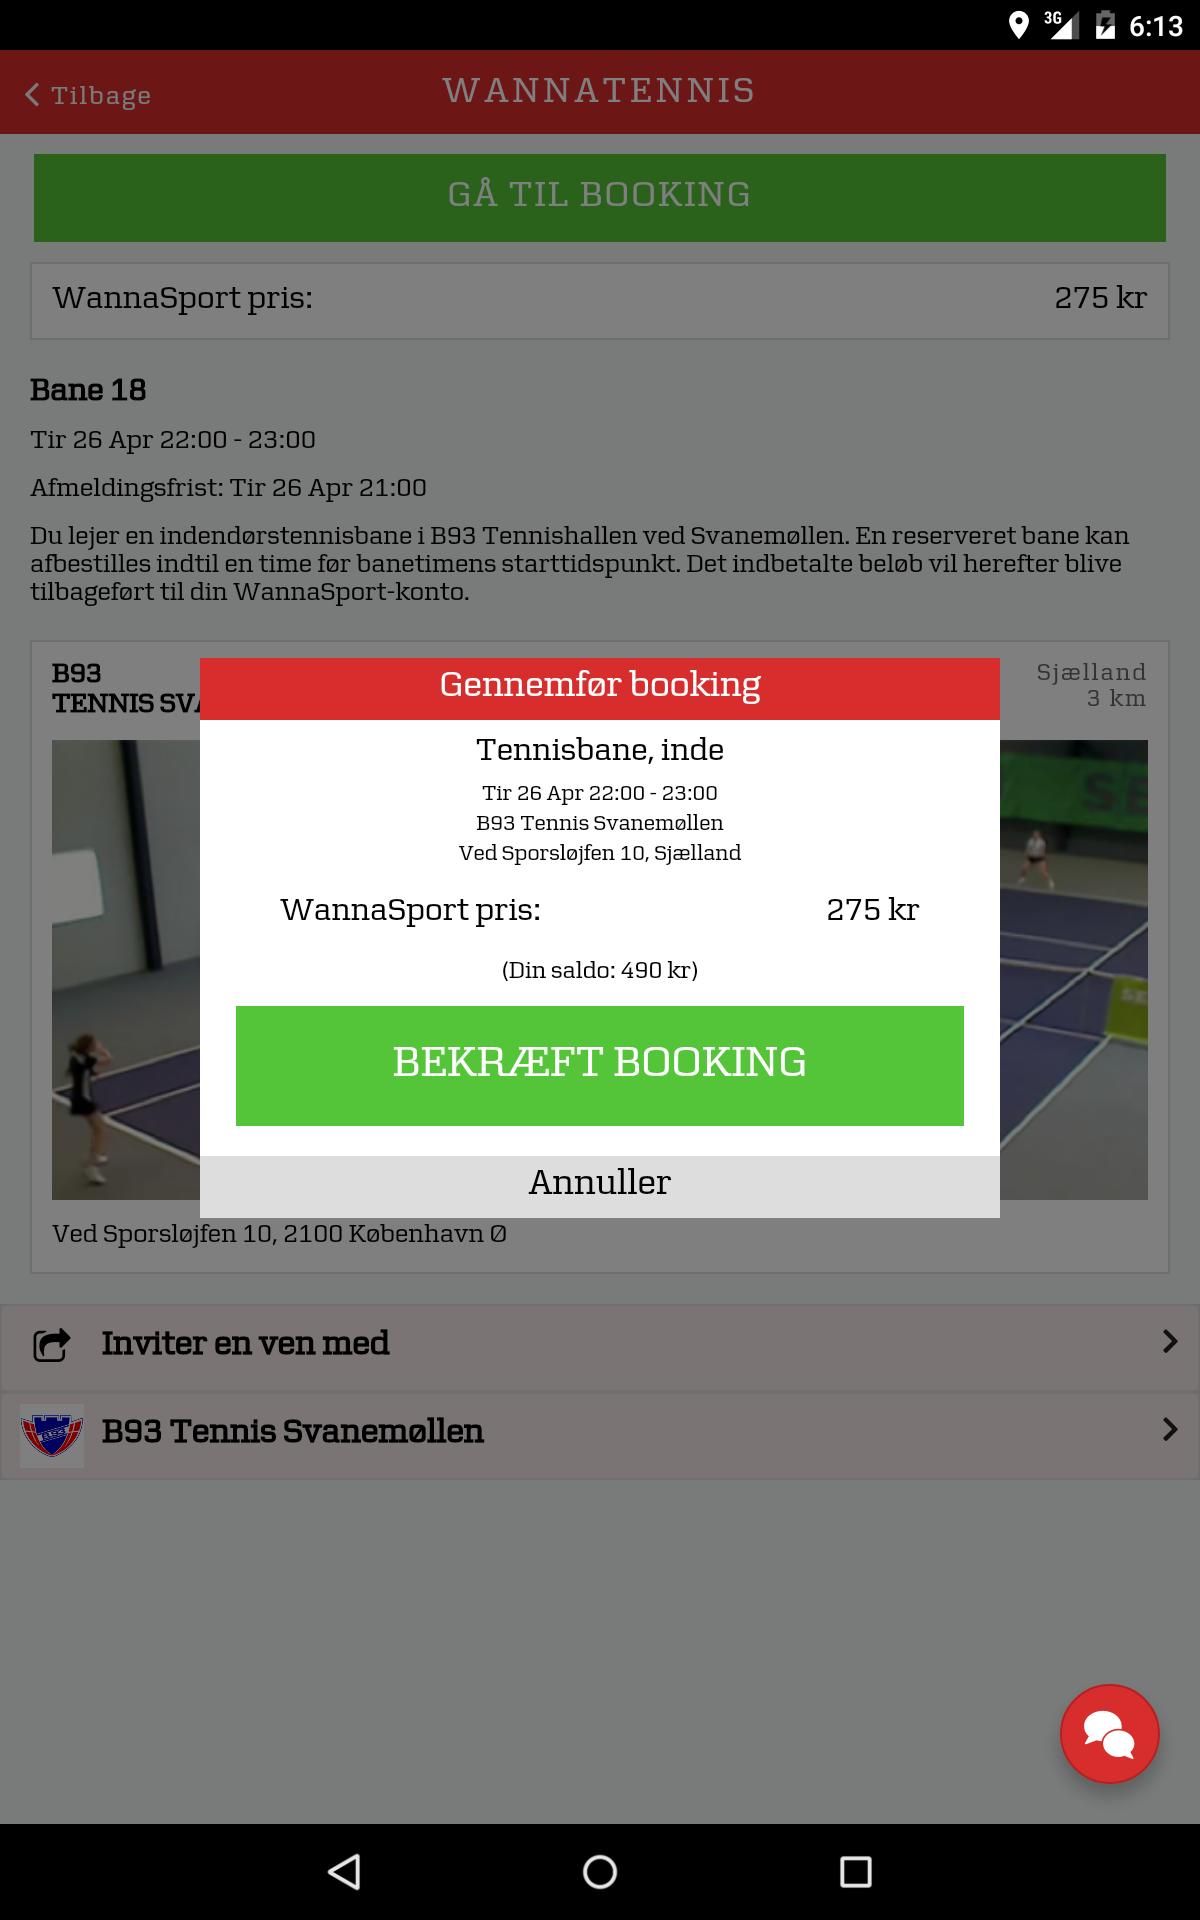 WannaTennis for Android - APK Download